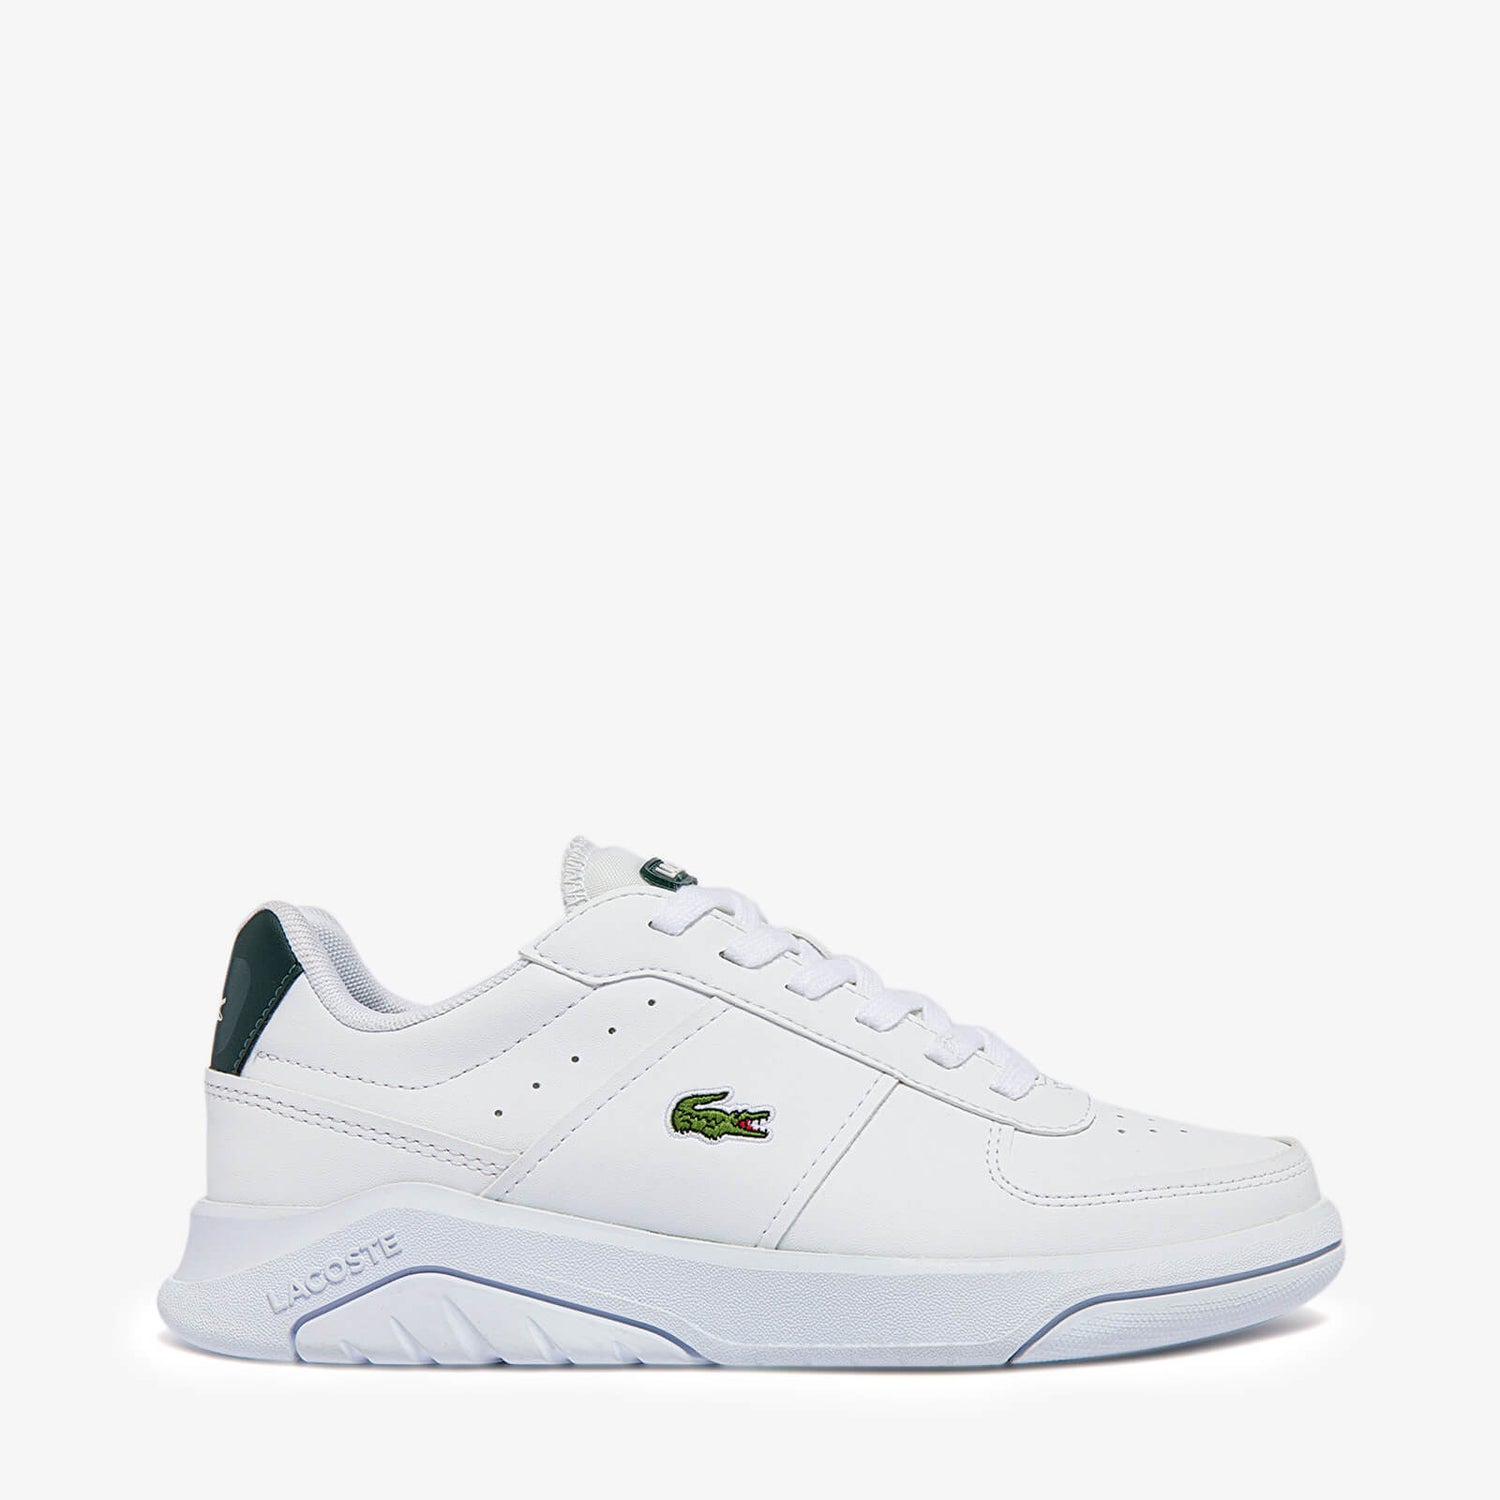 Lacoste Kids' Game Advance Trainers - White - UK 10 Kids